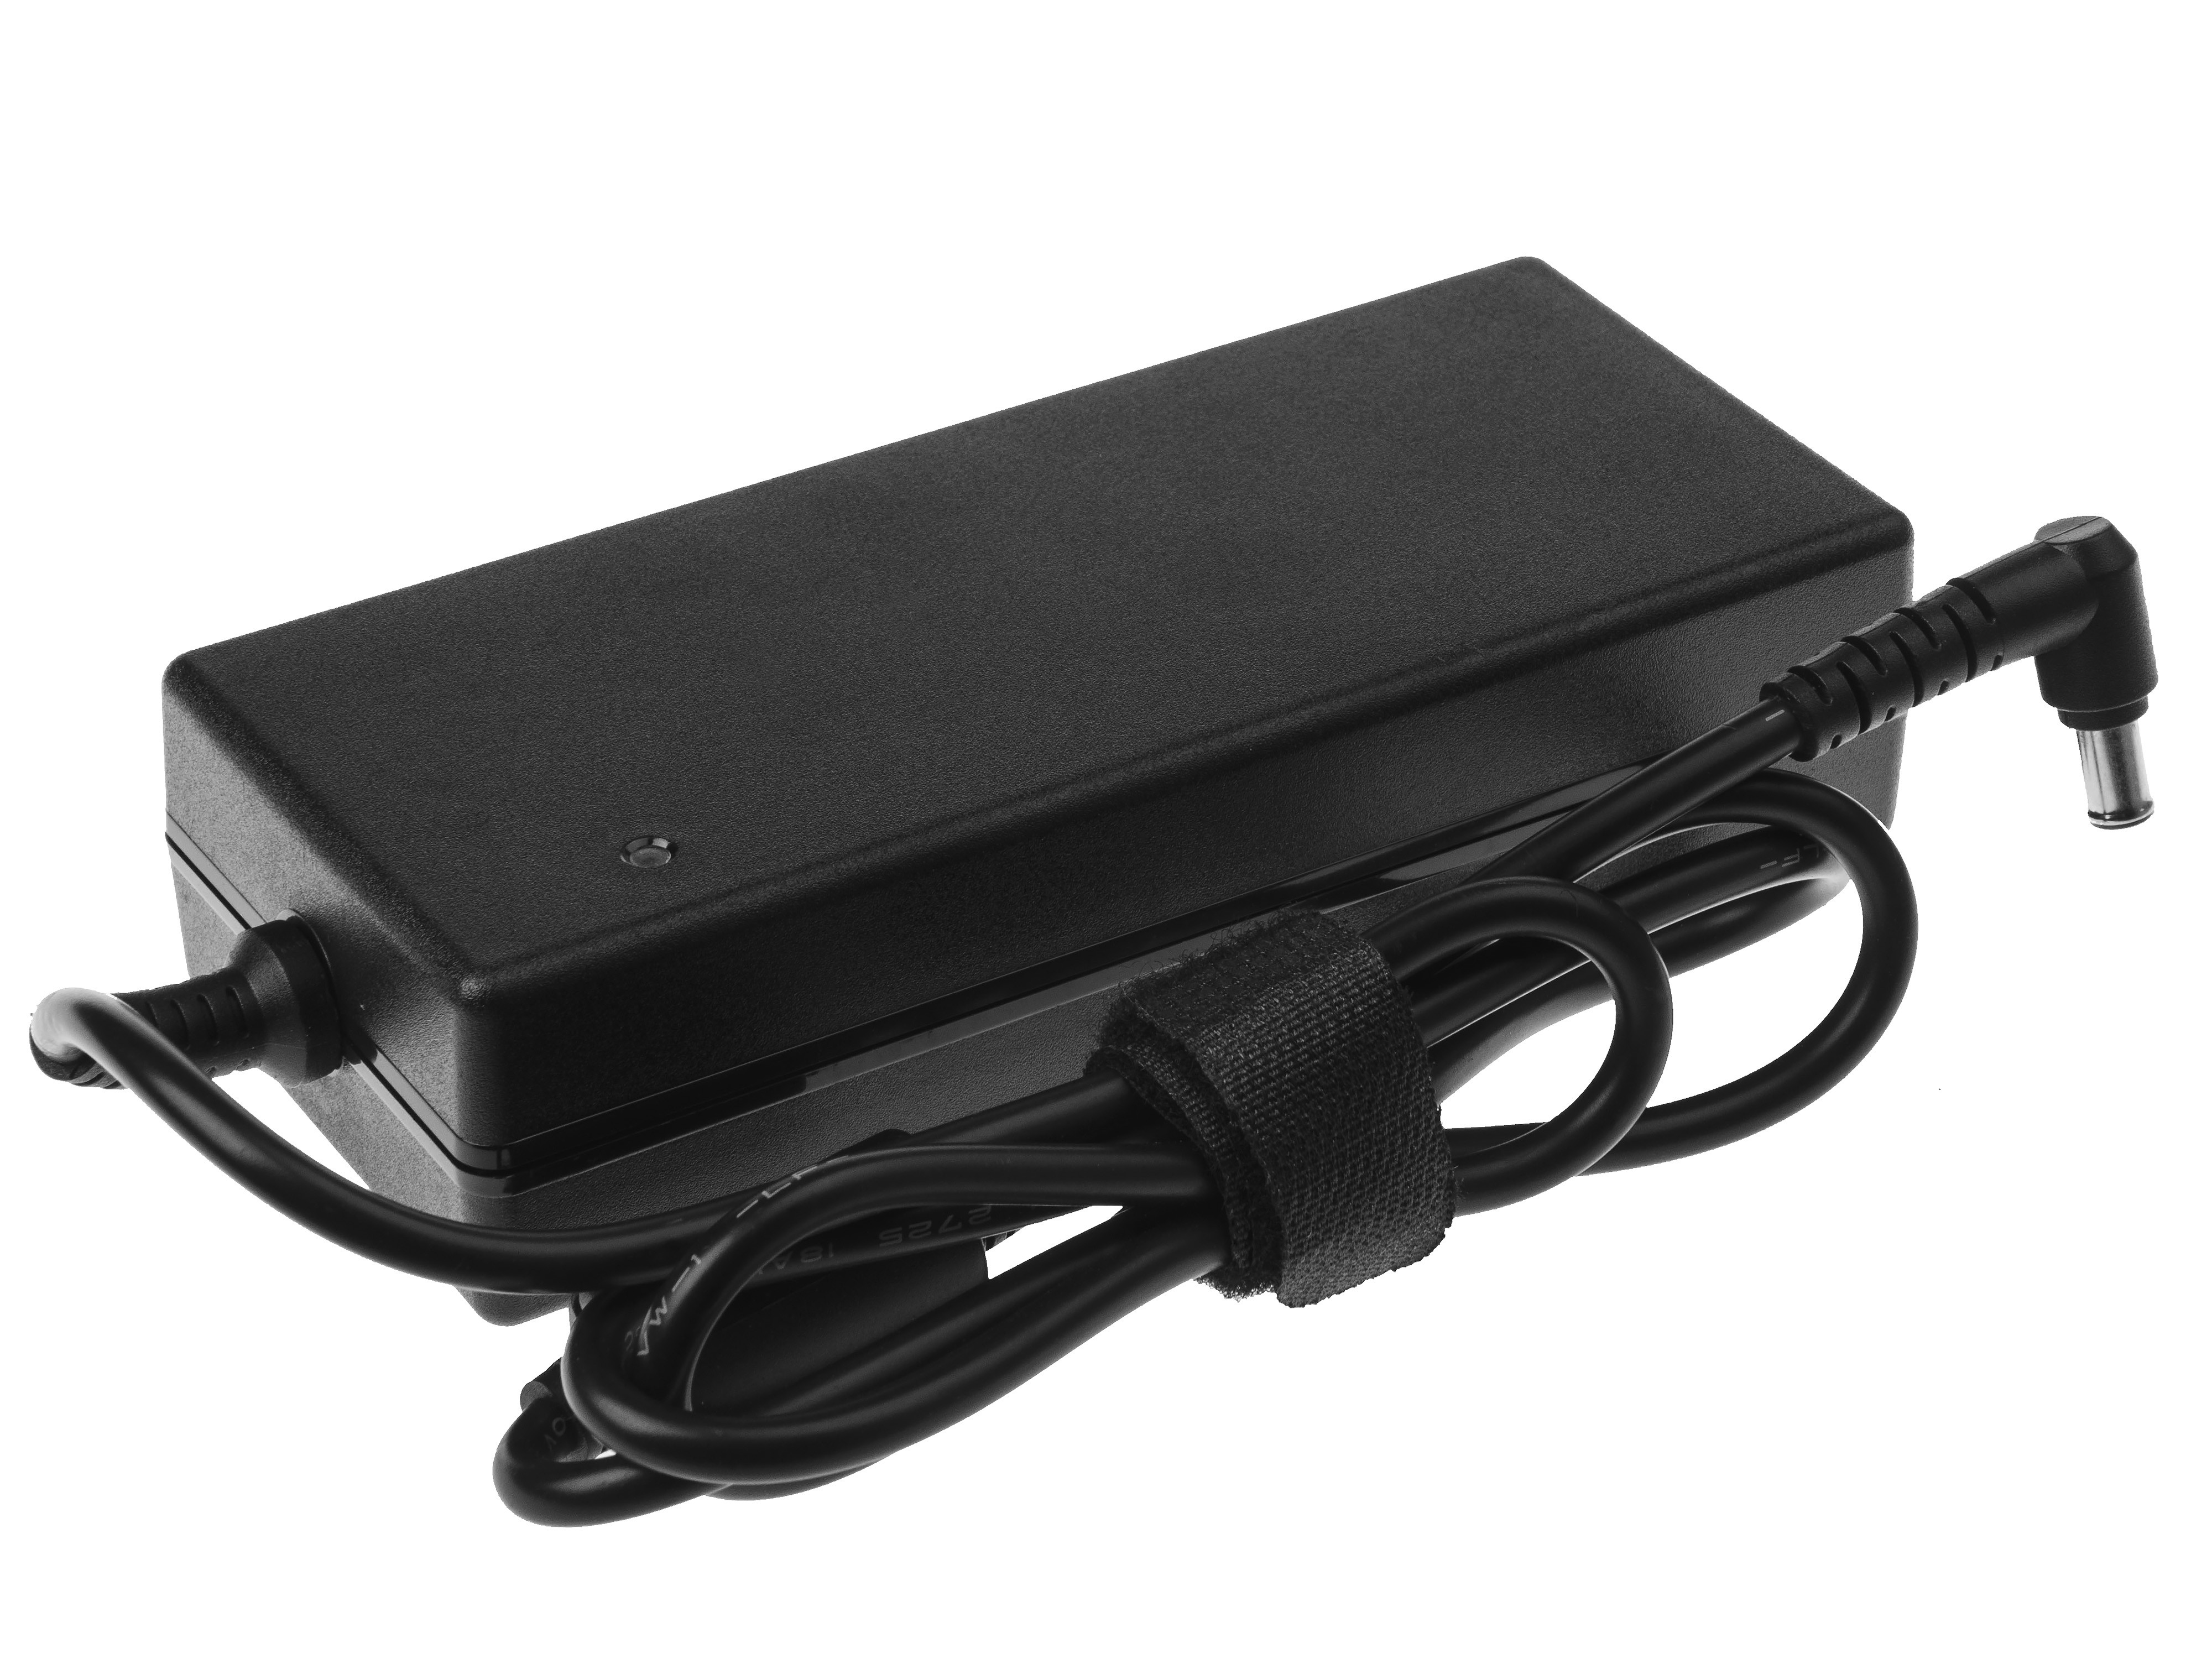 Green Cell PRO Charger / AC Adapter 19.5V 6.15A 120W for Sony Vaio PCG-81112M VGN-AR61S VGN-AR71S VGN-AW31S VPCF11S1E